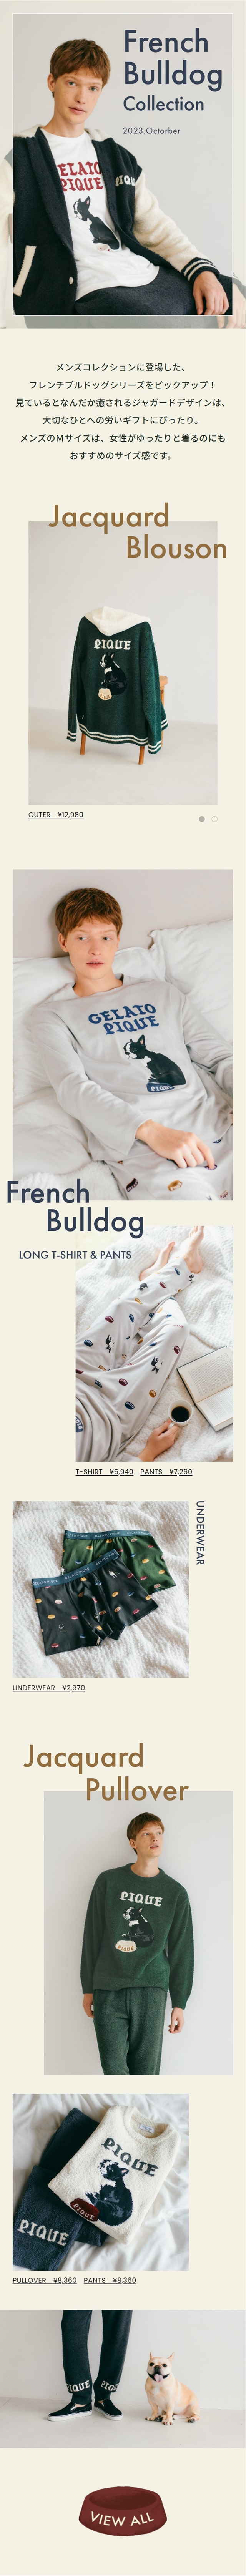 French Bulldog Collection_sp_1